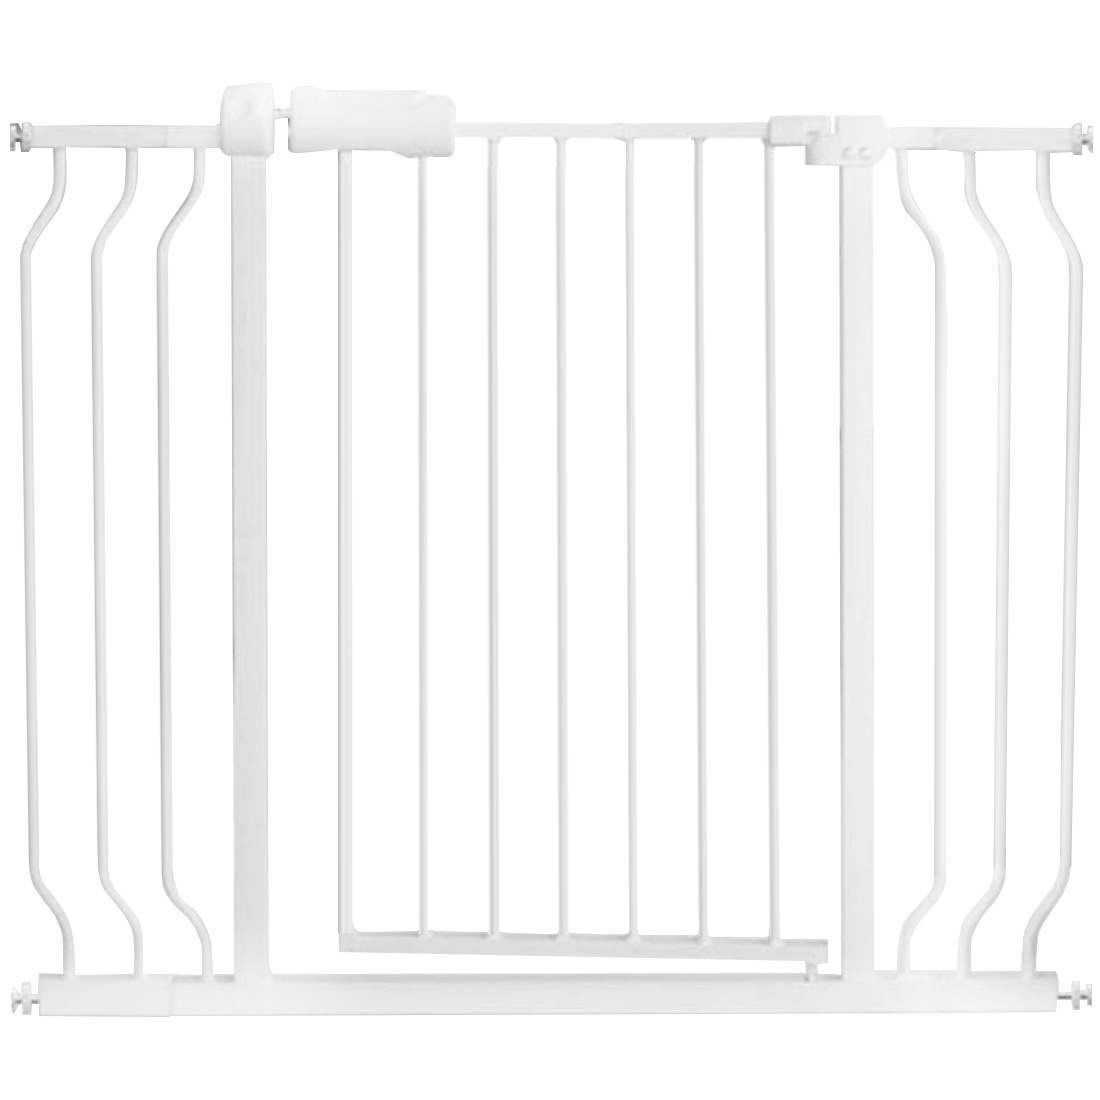  baby gate baby fence installation width 98-110cm.. trim type auto Crows function pet gate enhancing frame attaching safety 